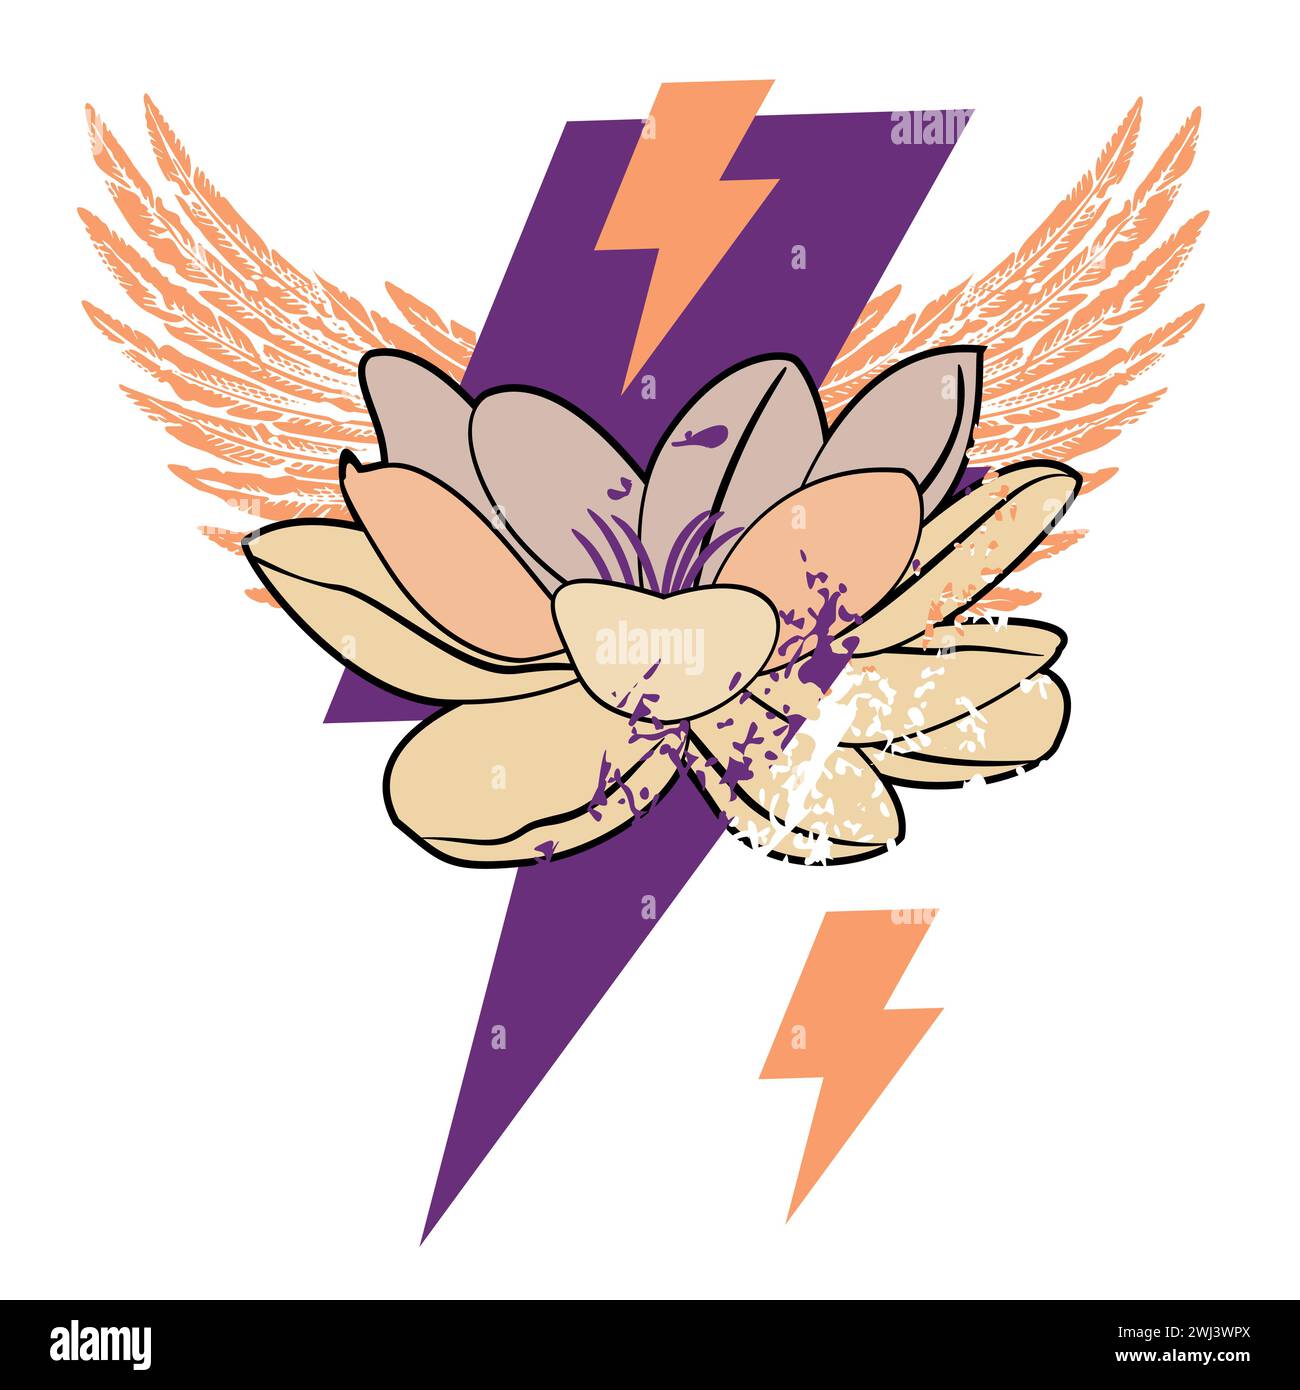 T-shirt design of a lotus flower, thunderbolt symbol and two wings in violet and orange colors on a white background. Stock Vector